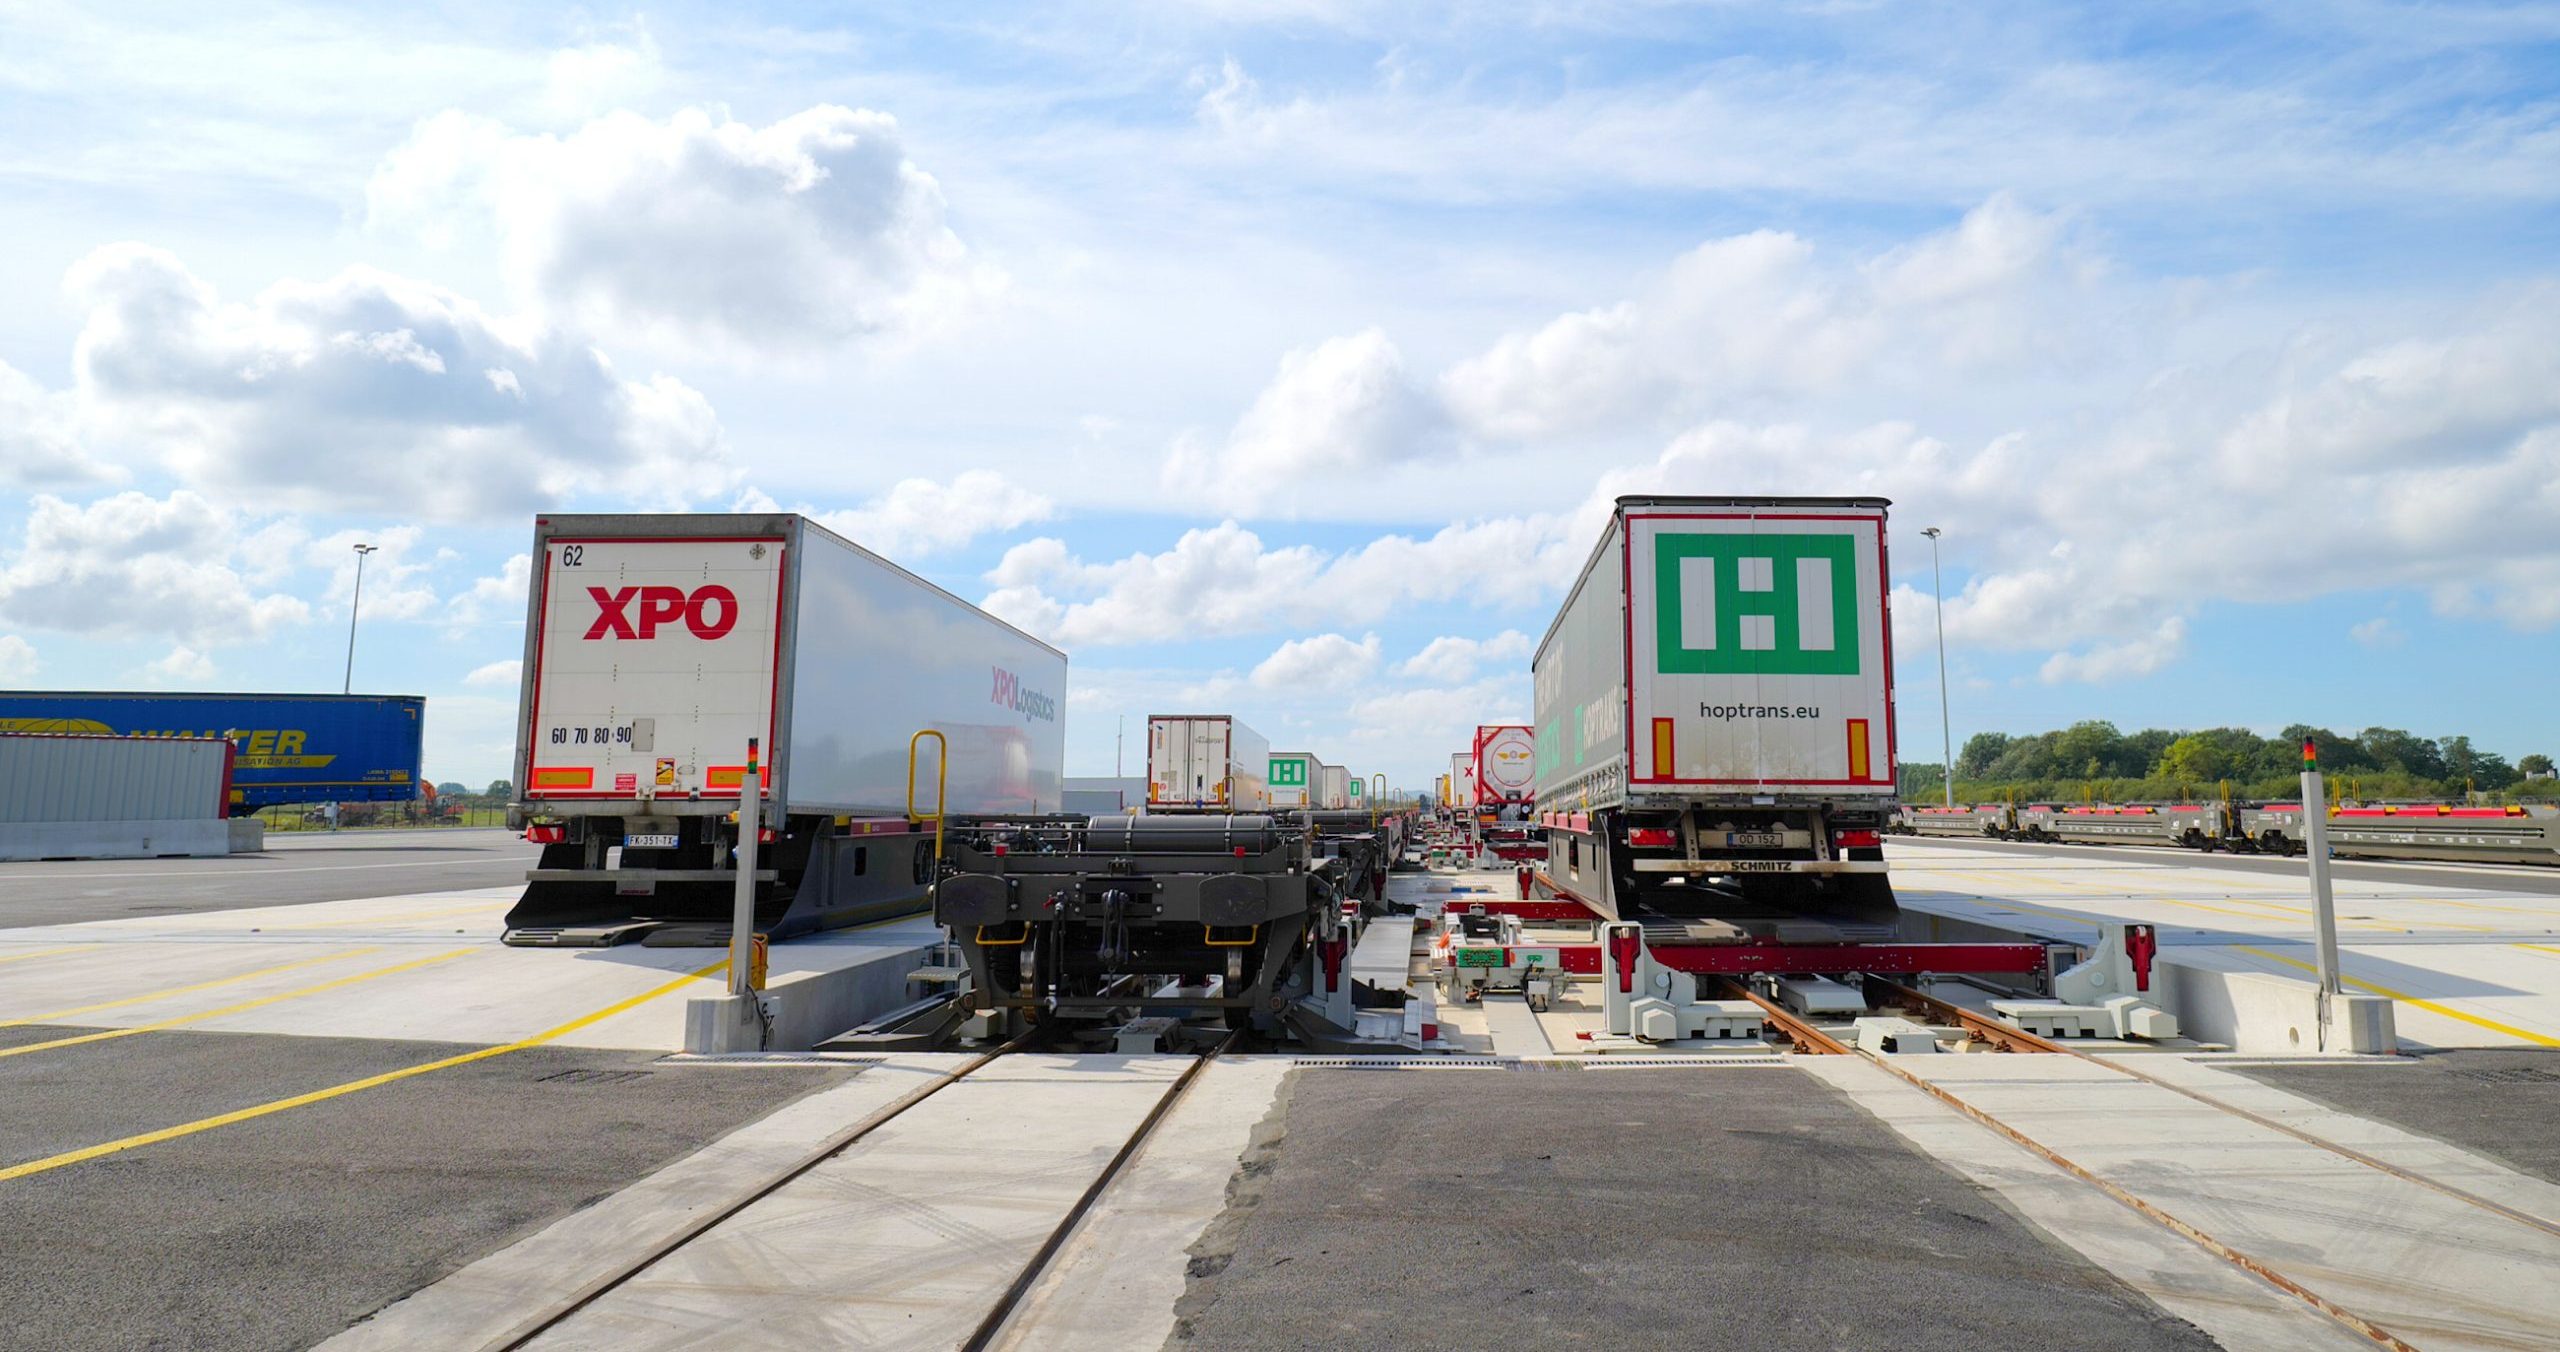 freight terminals in Germany and Italy